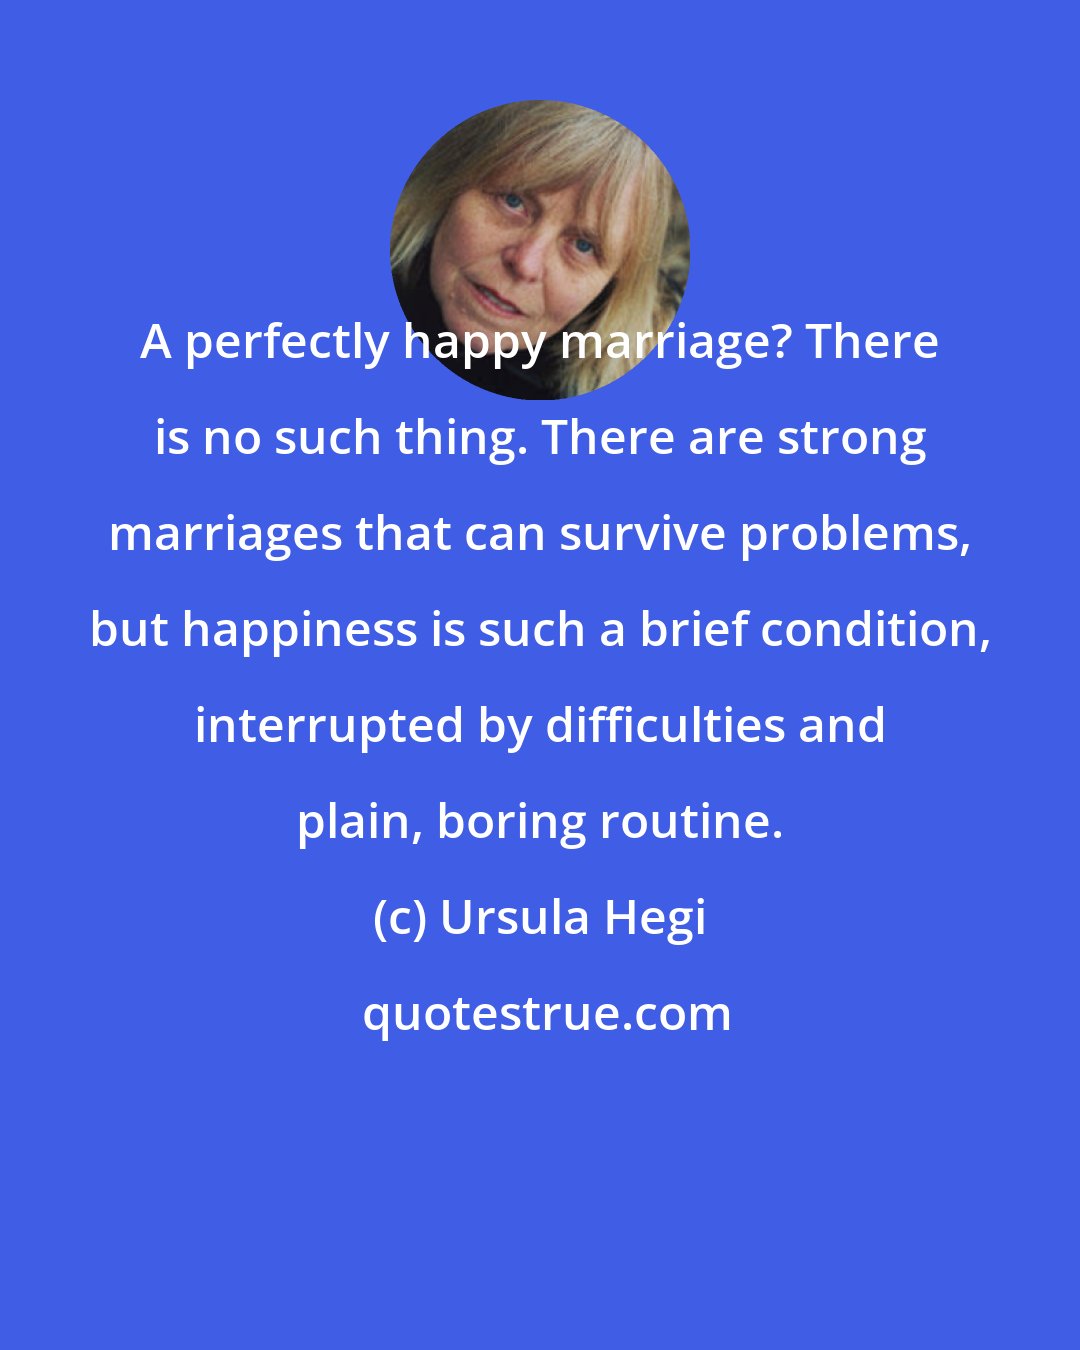 Ursula Hegi: A perfectly happy marriage? There is no such thing. There are strong marriages that can survive problems, but happiness is such a brief condition, interrupted by difficulties and plain, boring routine.